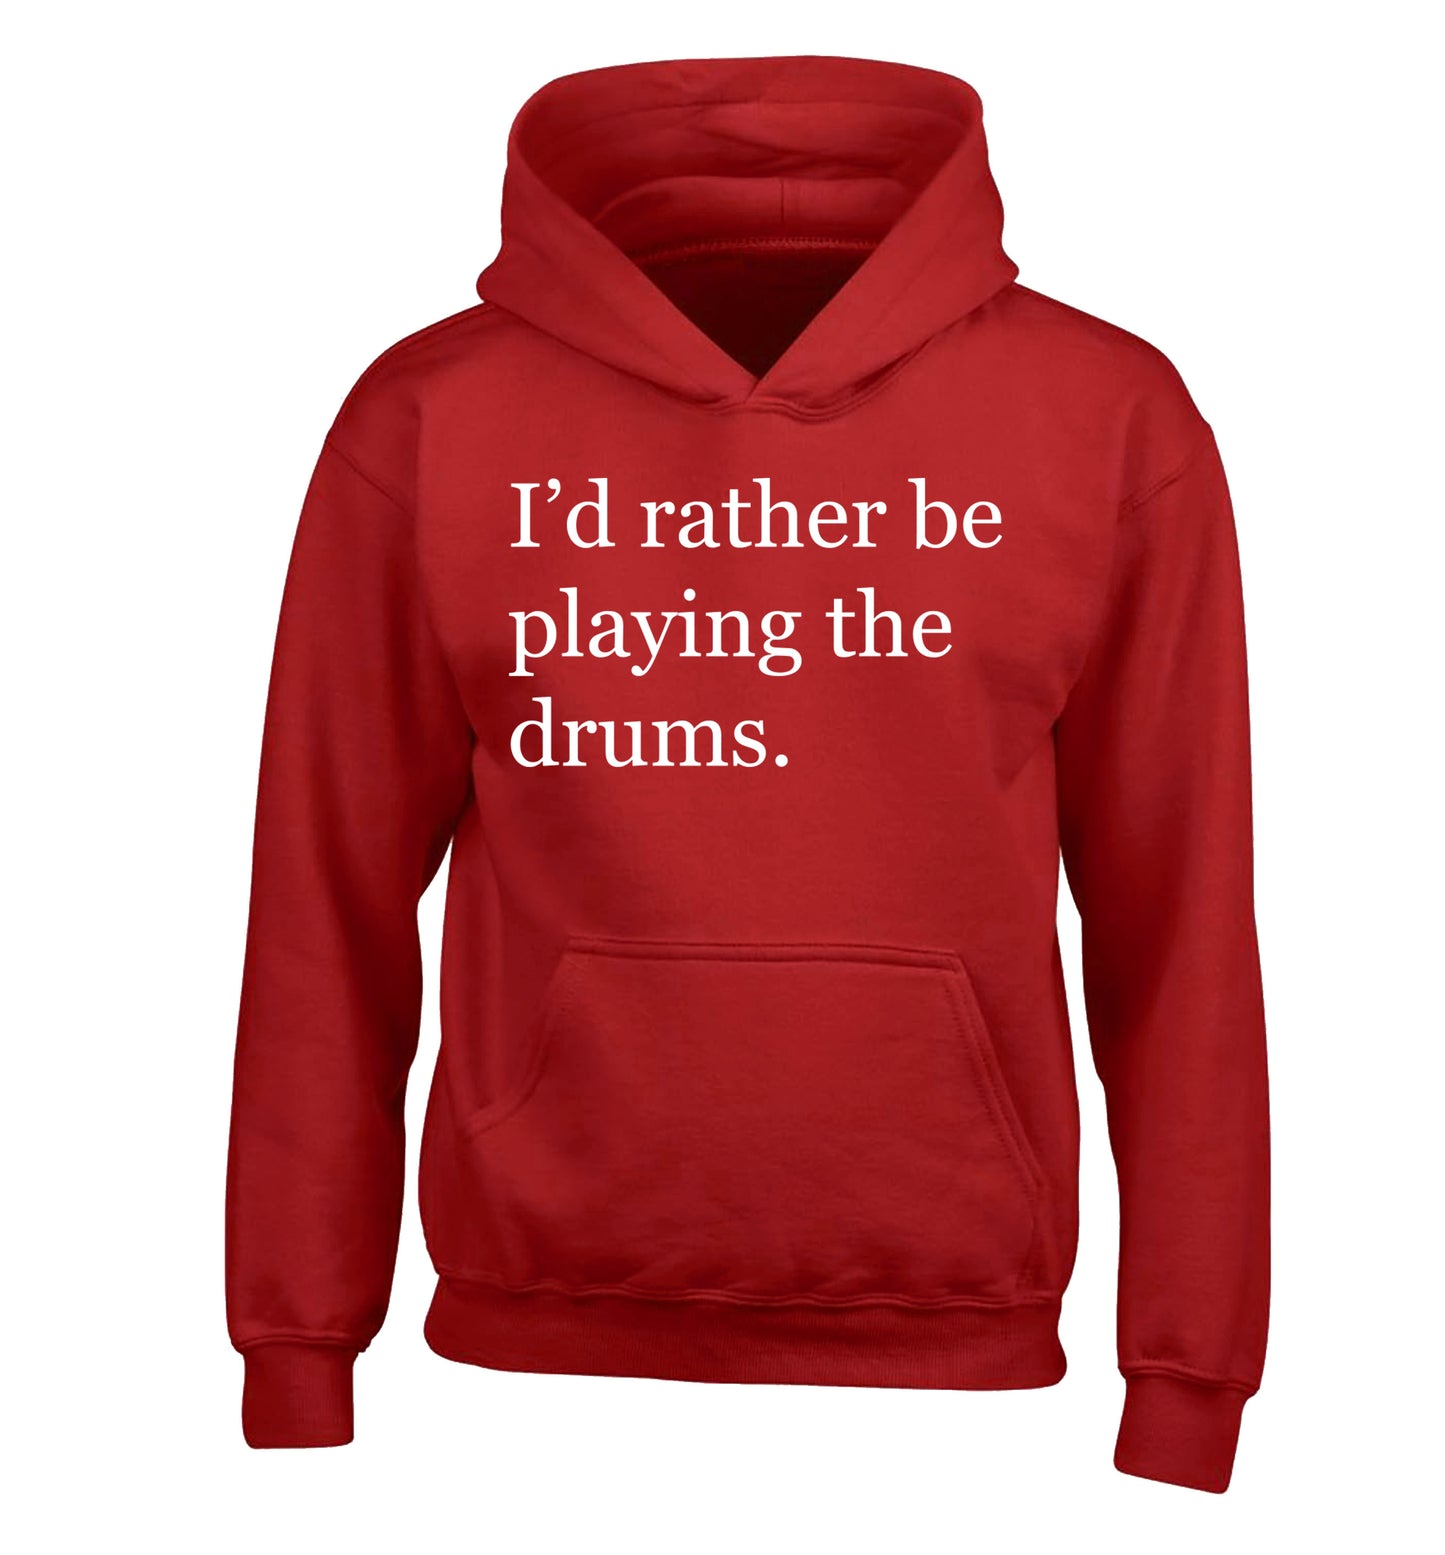 I'd rather be playing the drums children's red hoodie 12-14 Years